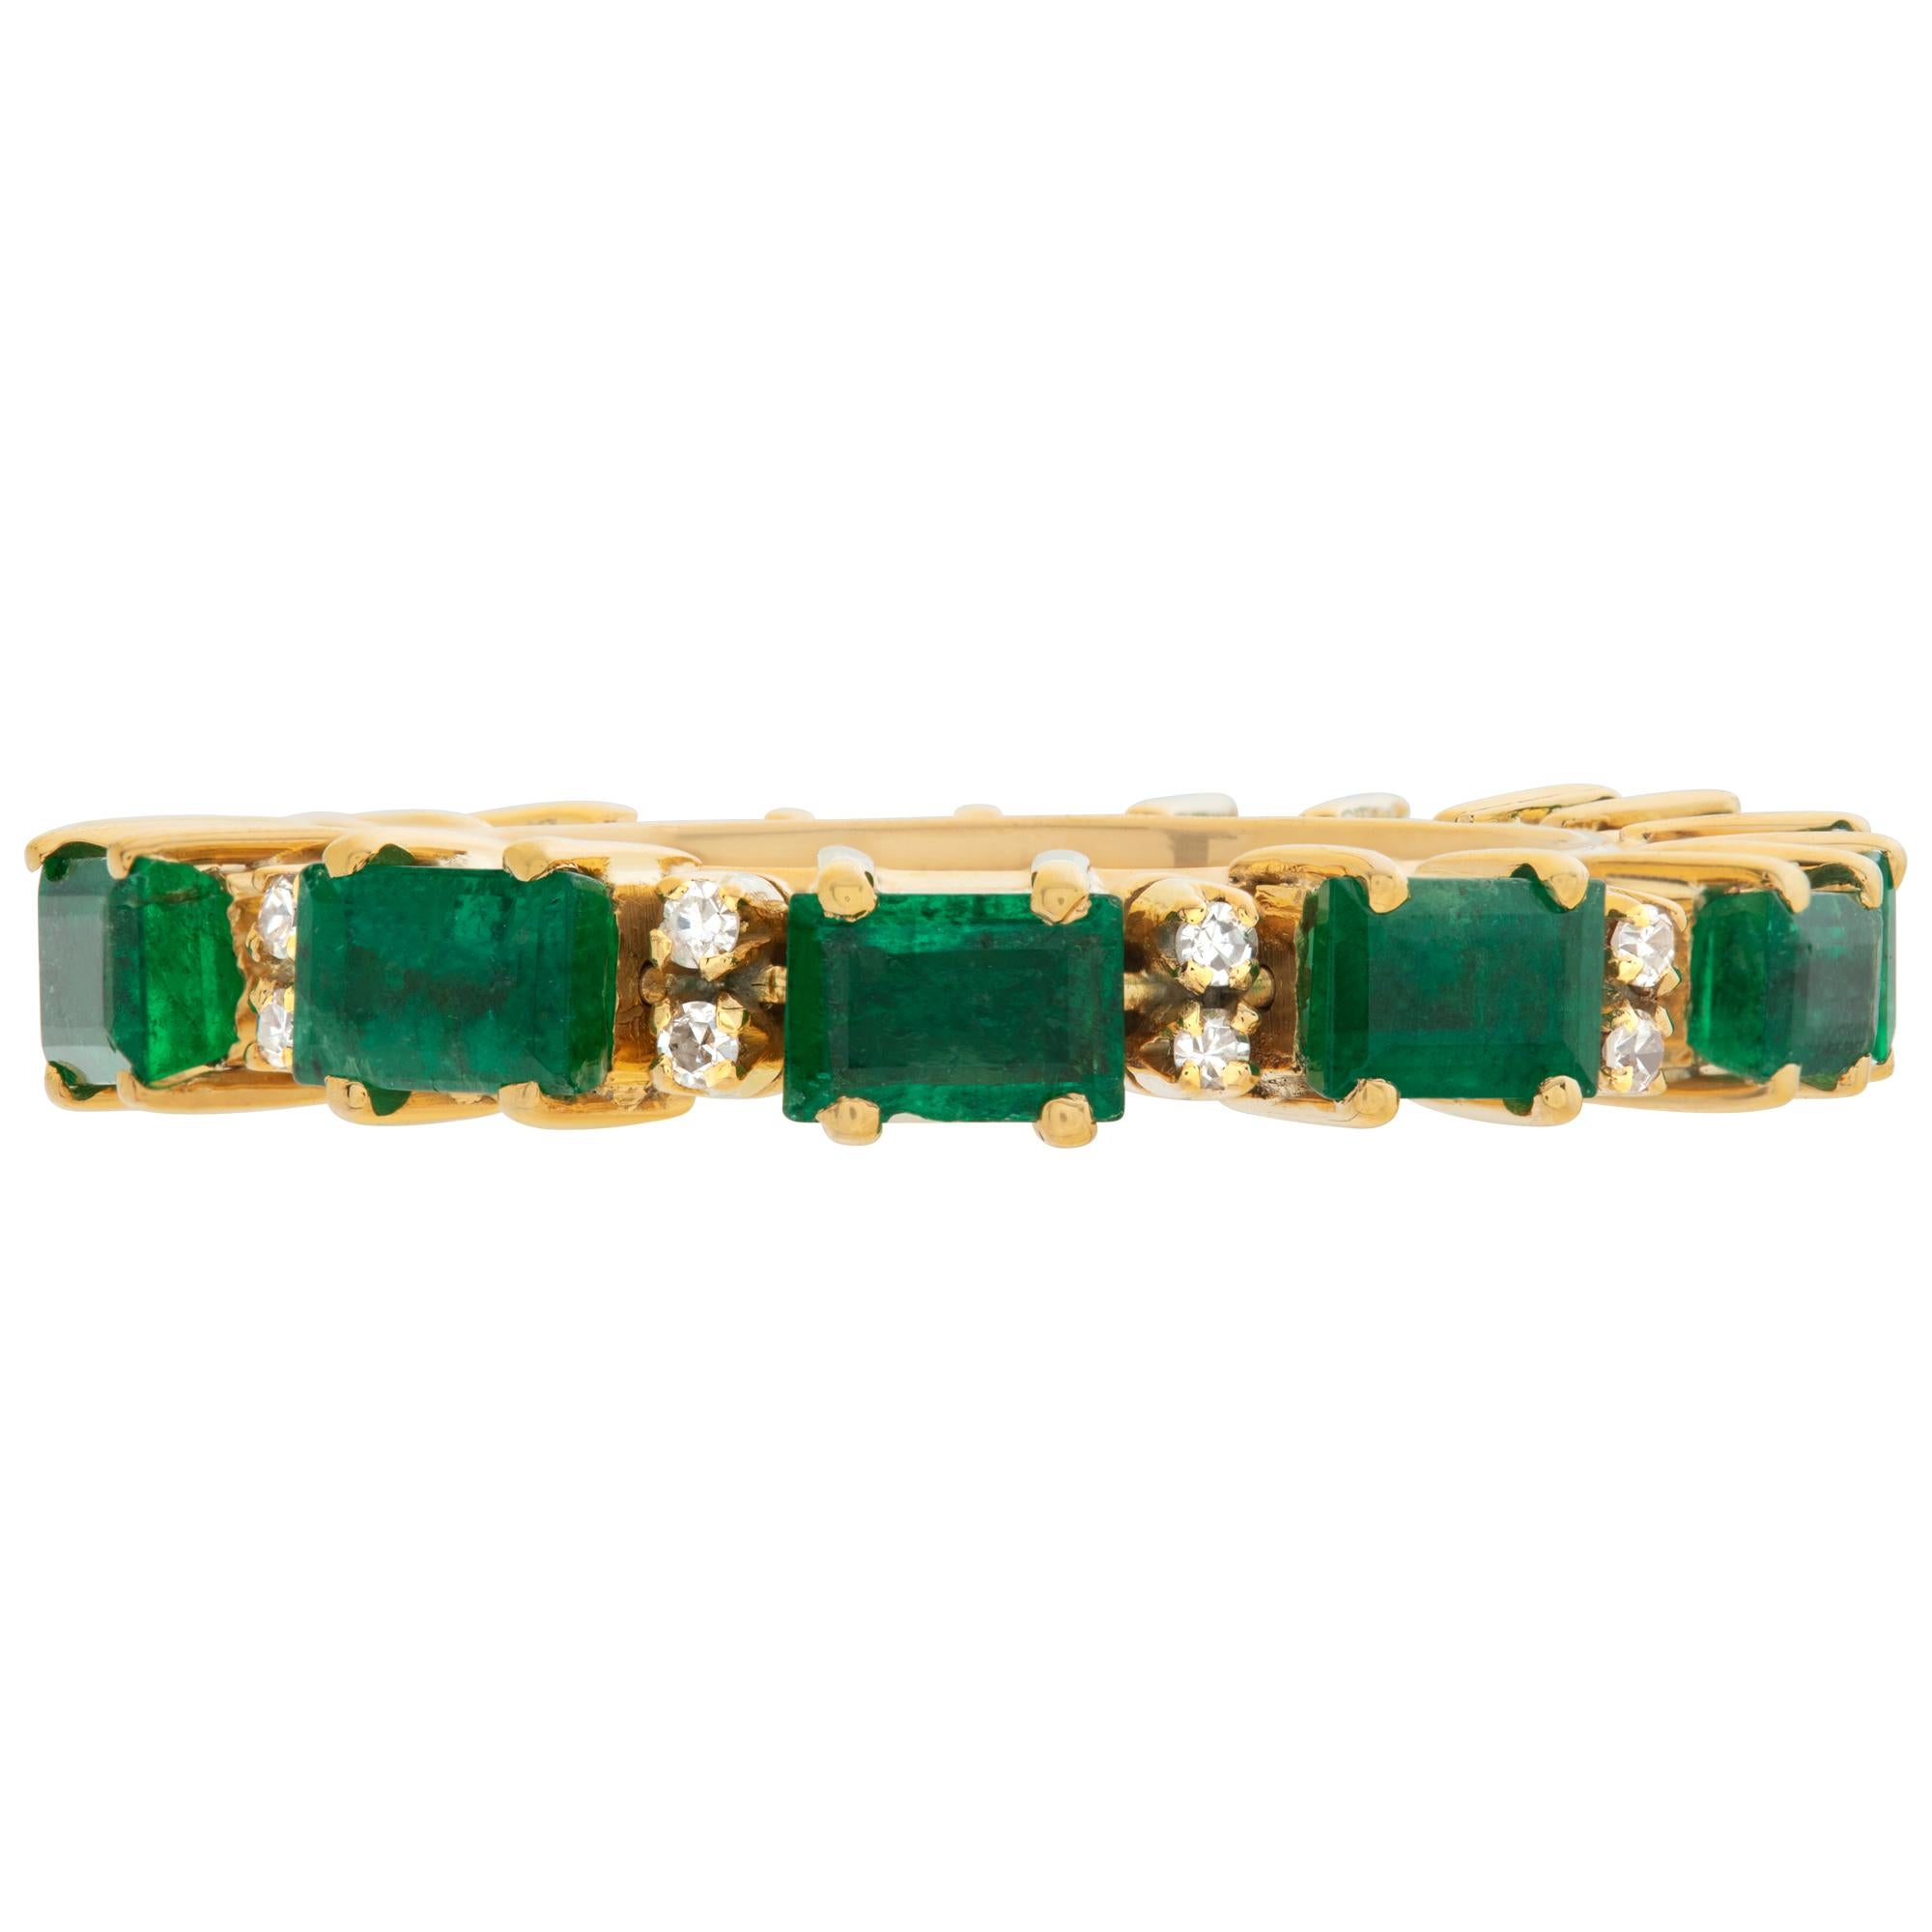 Eternity band with emeralds & diamonds set in 14k yellow goild. Emeralds total approx. weight: 2.20 carats. Diamonds total approx weight: 0.50 carat, estimate: G-H color, VS clarity.  Size 7This Diamond/Emerald ring is currently size 7 and some